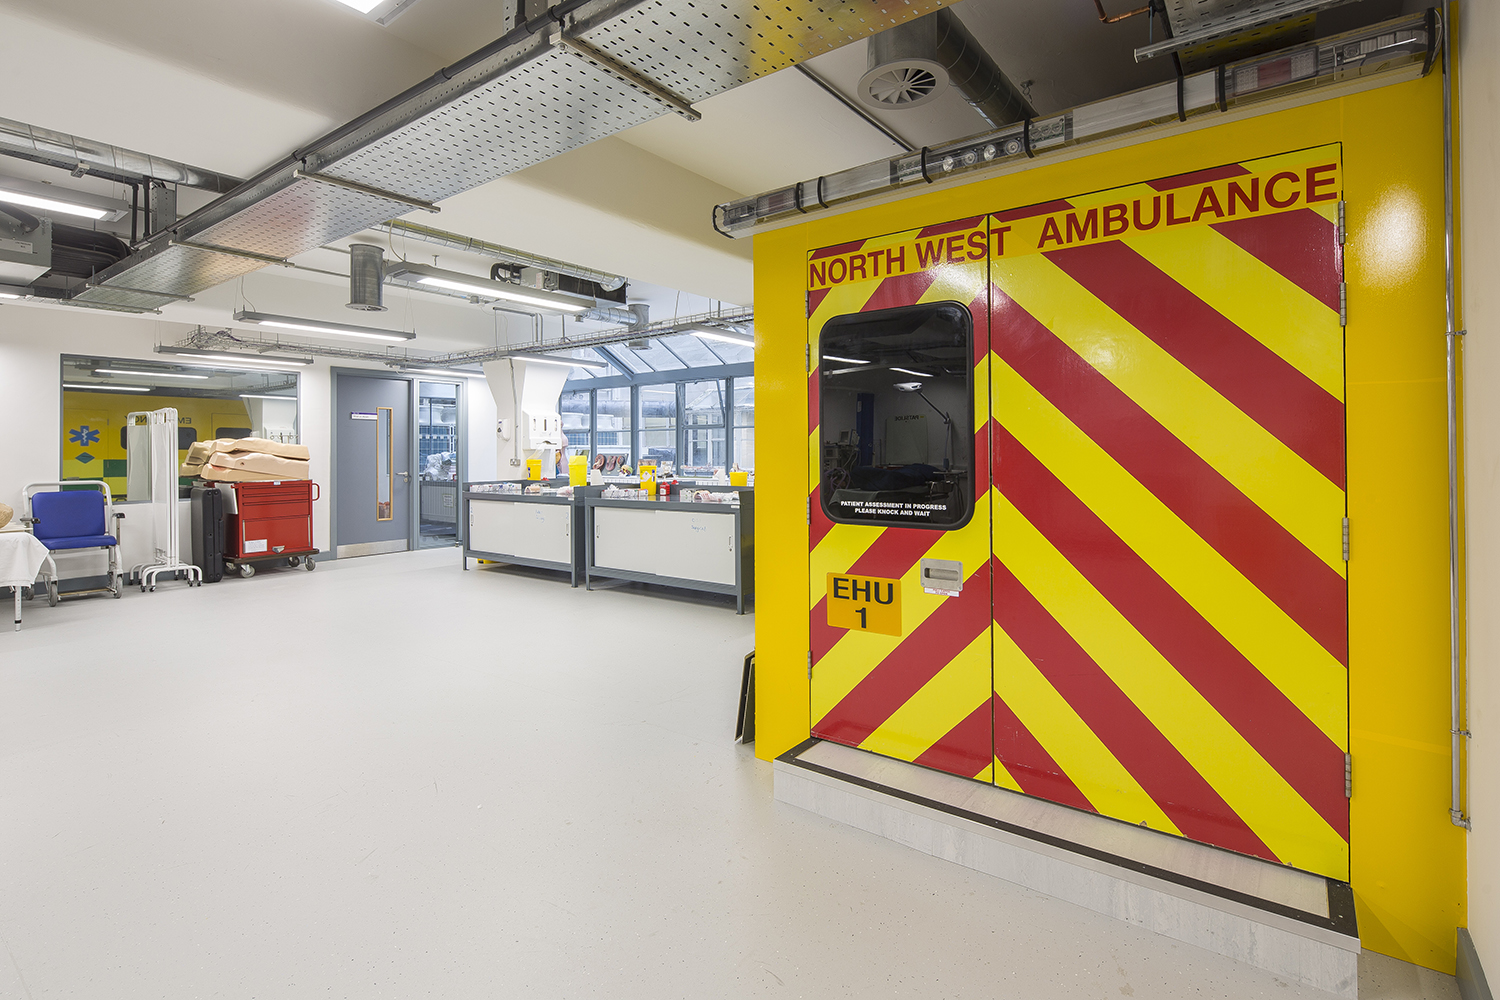 Clinical skills facilities at St James' in Manchester, including an ambulance simulator.